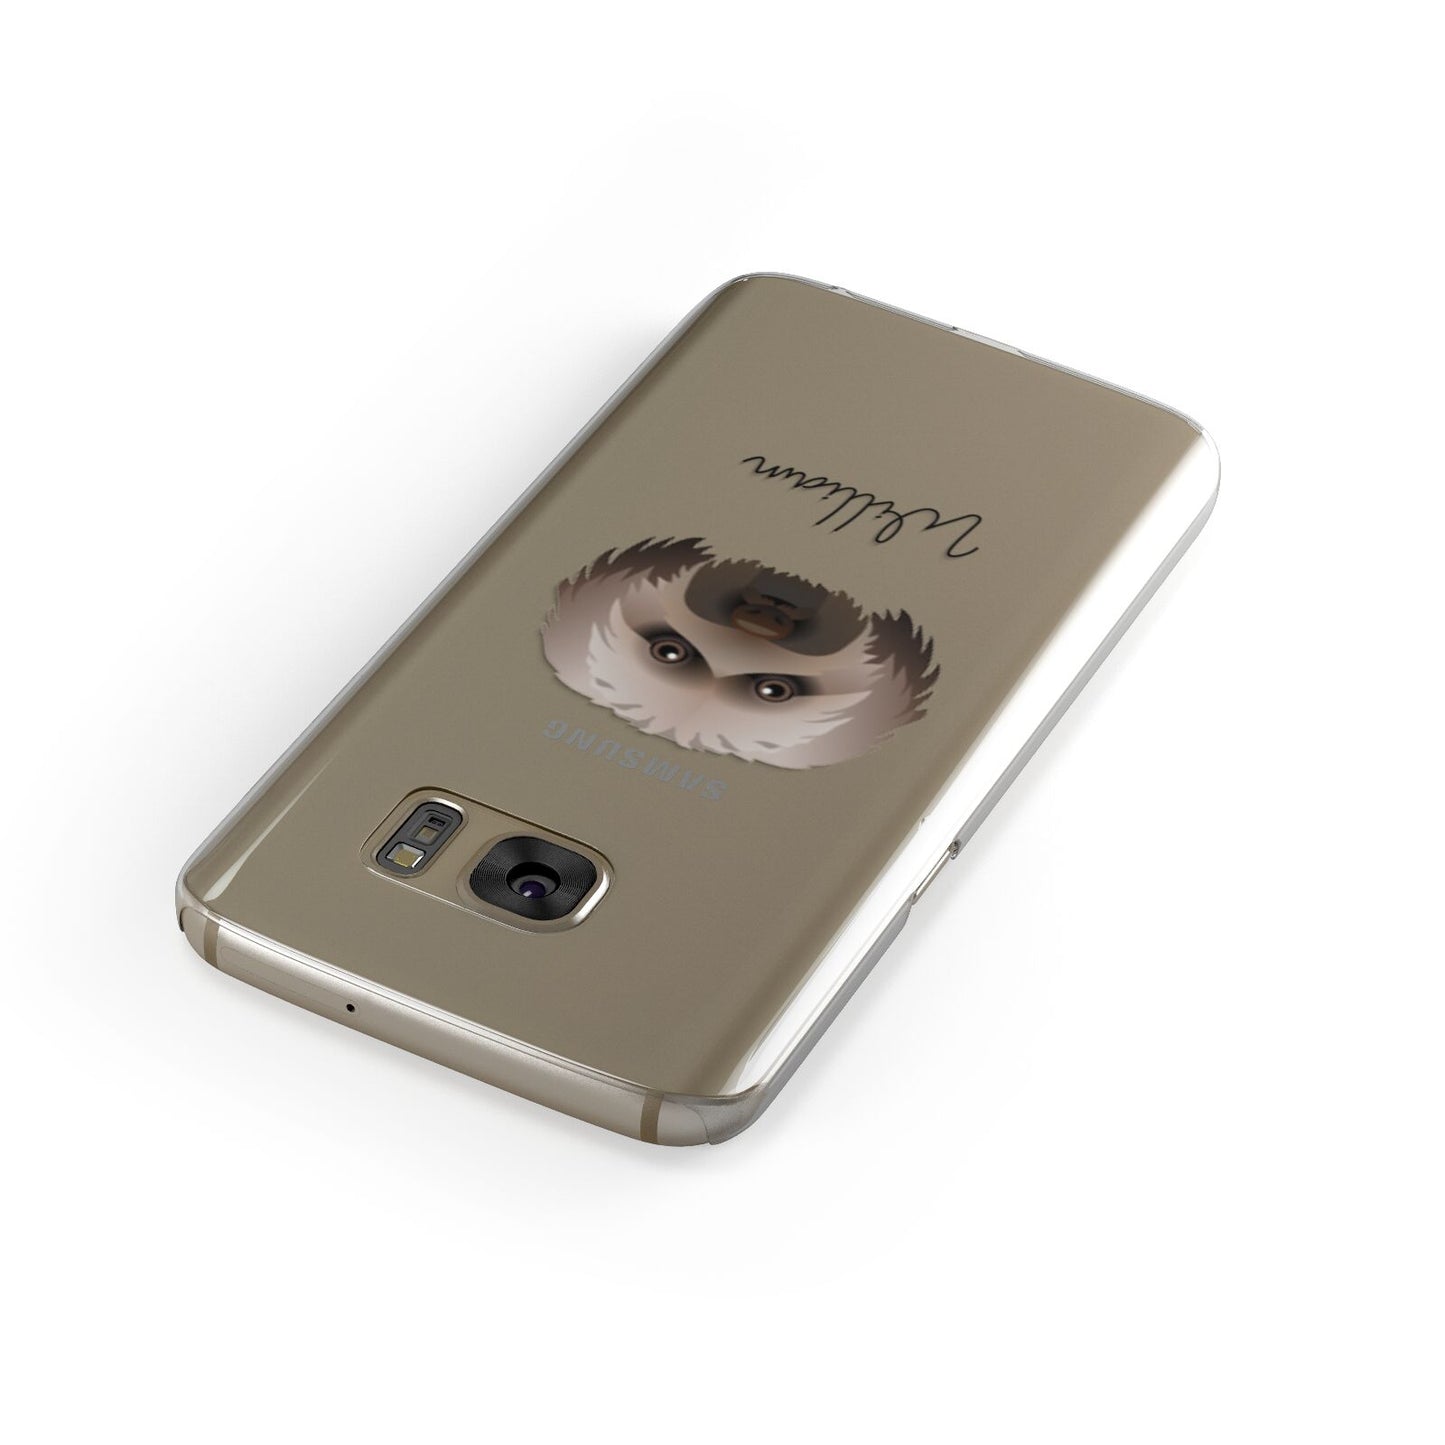 Doxiepoo Personalised Samsung Galaxy Case Front Close Up